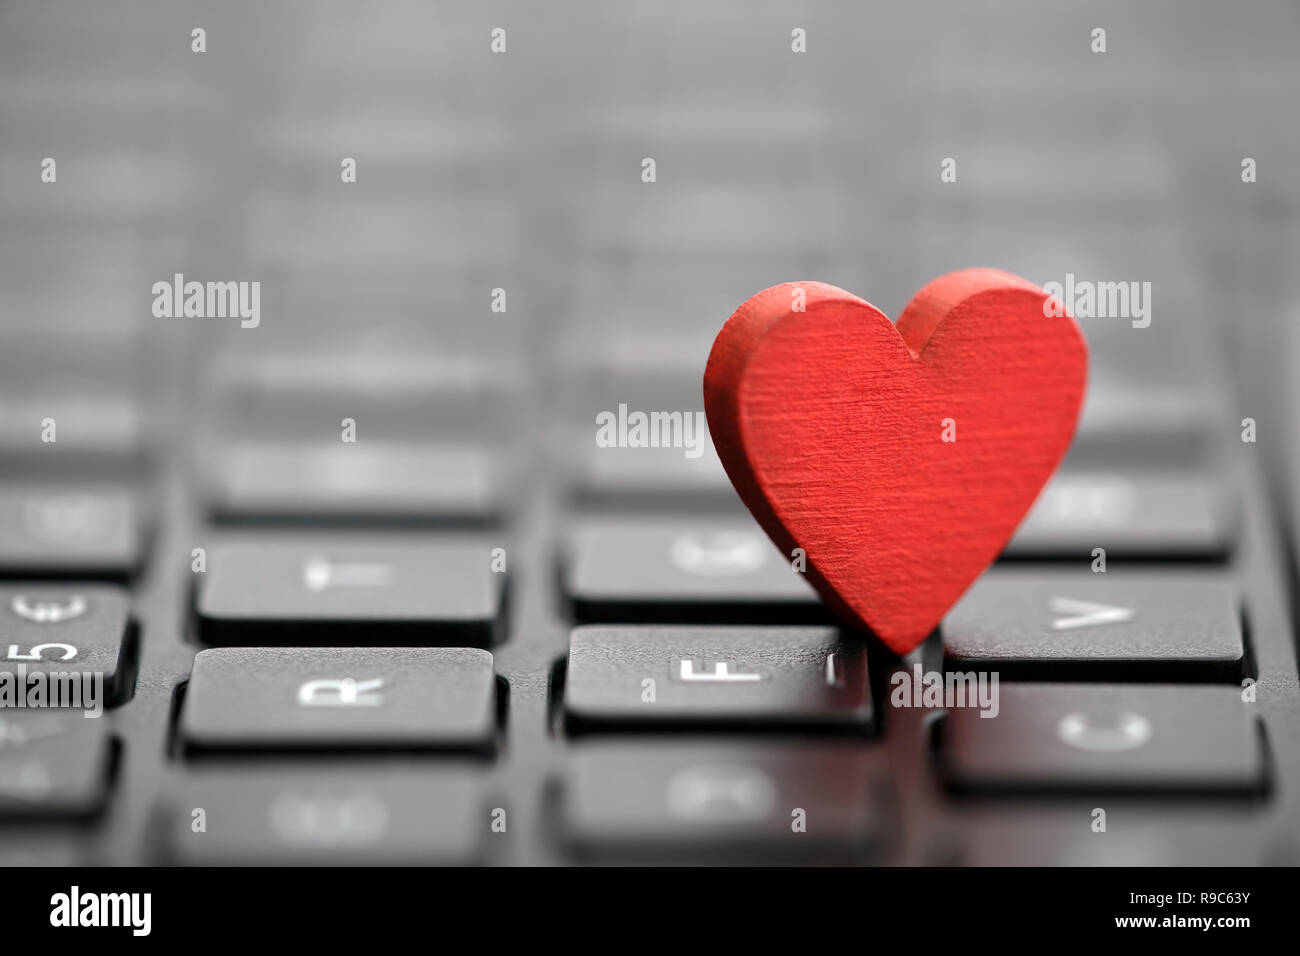 Small red heart on keyboard. Internet dating concept. Stock Photo